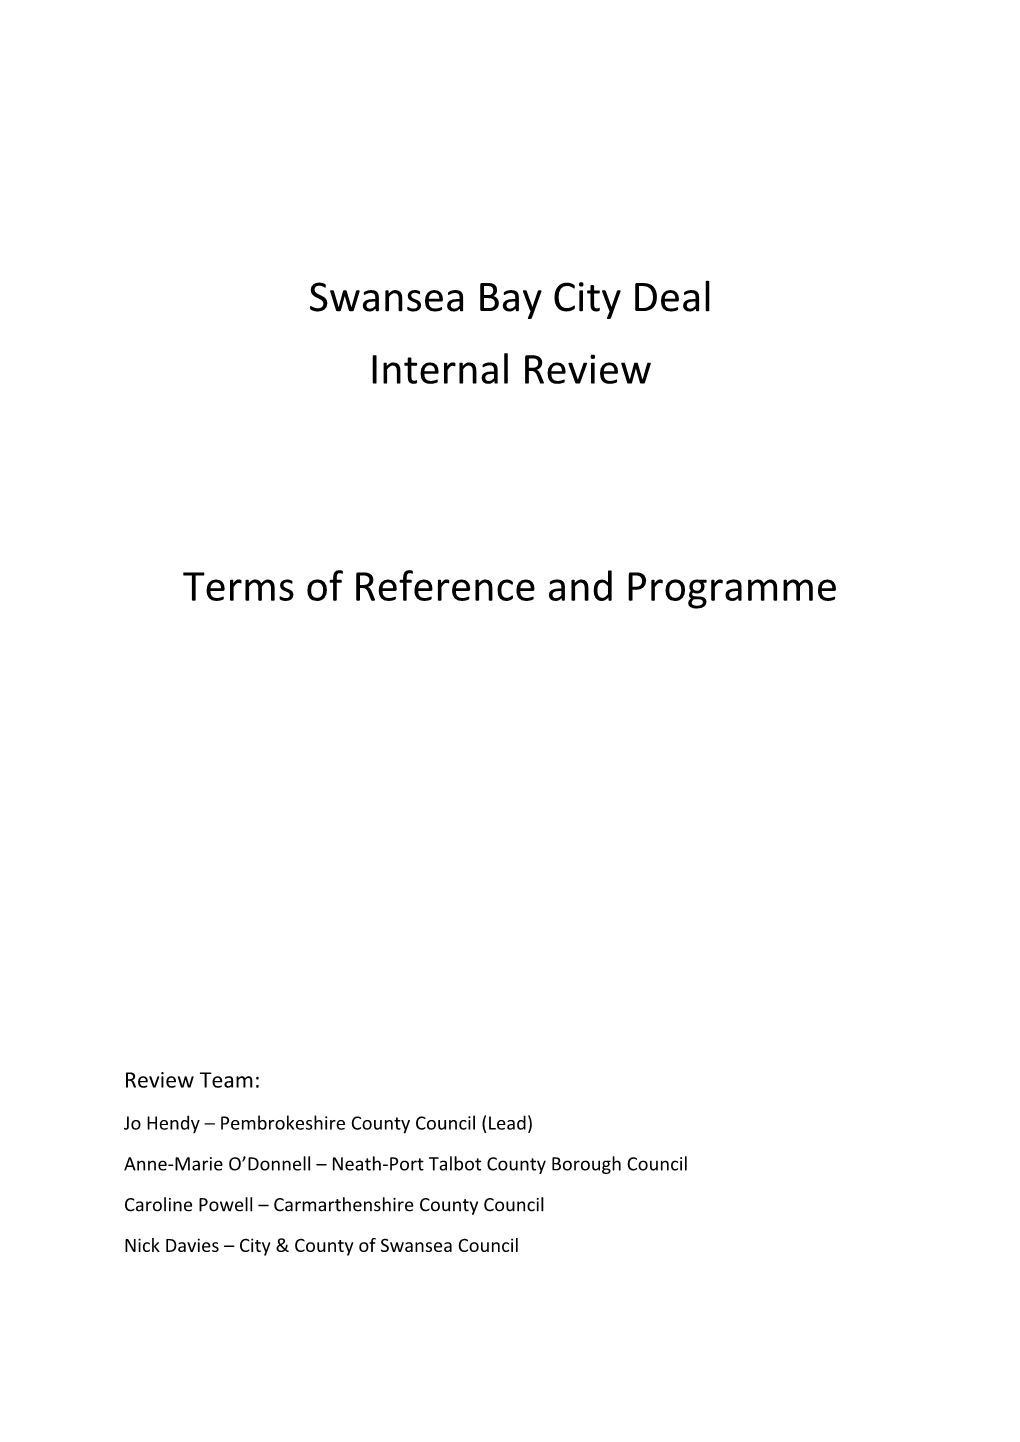 Swansea Bay City Deal Internal Review Terms of Reference And